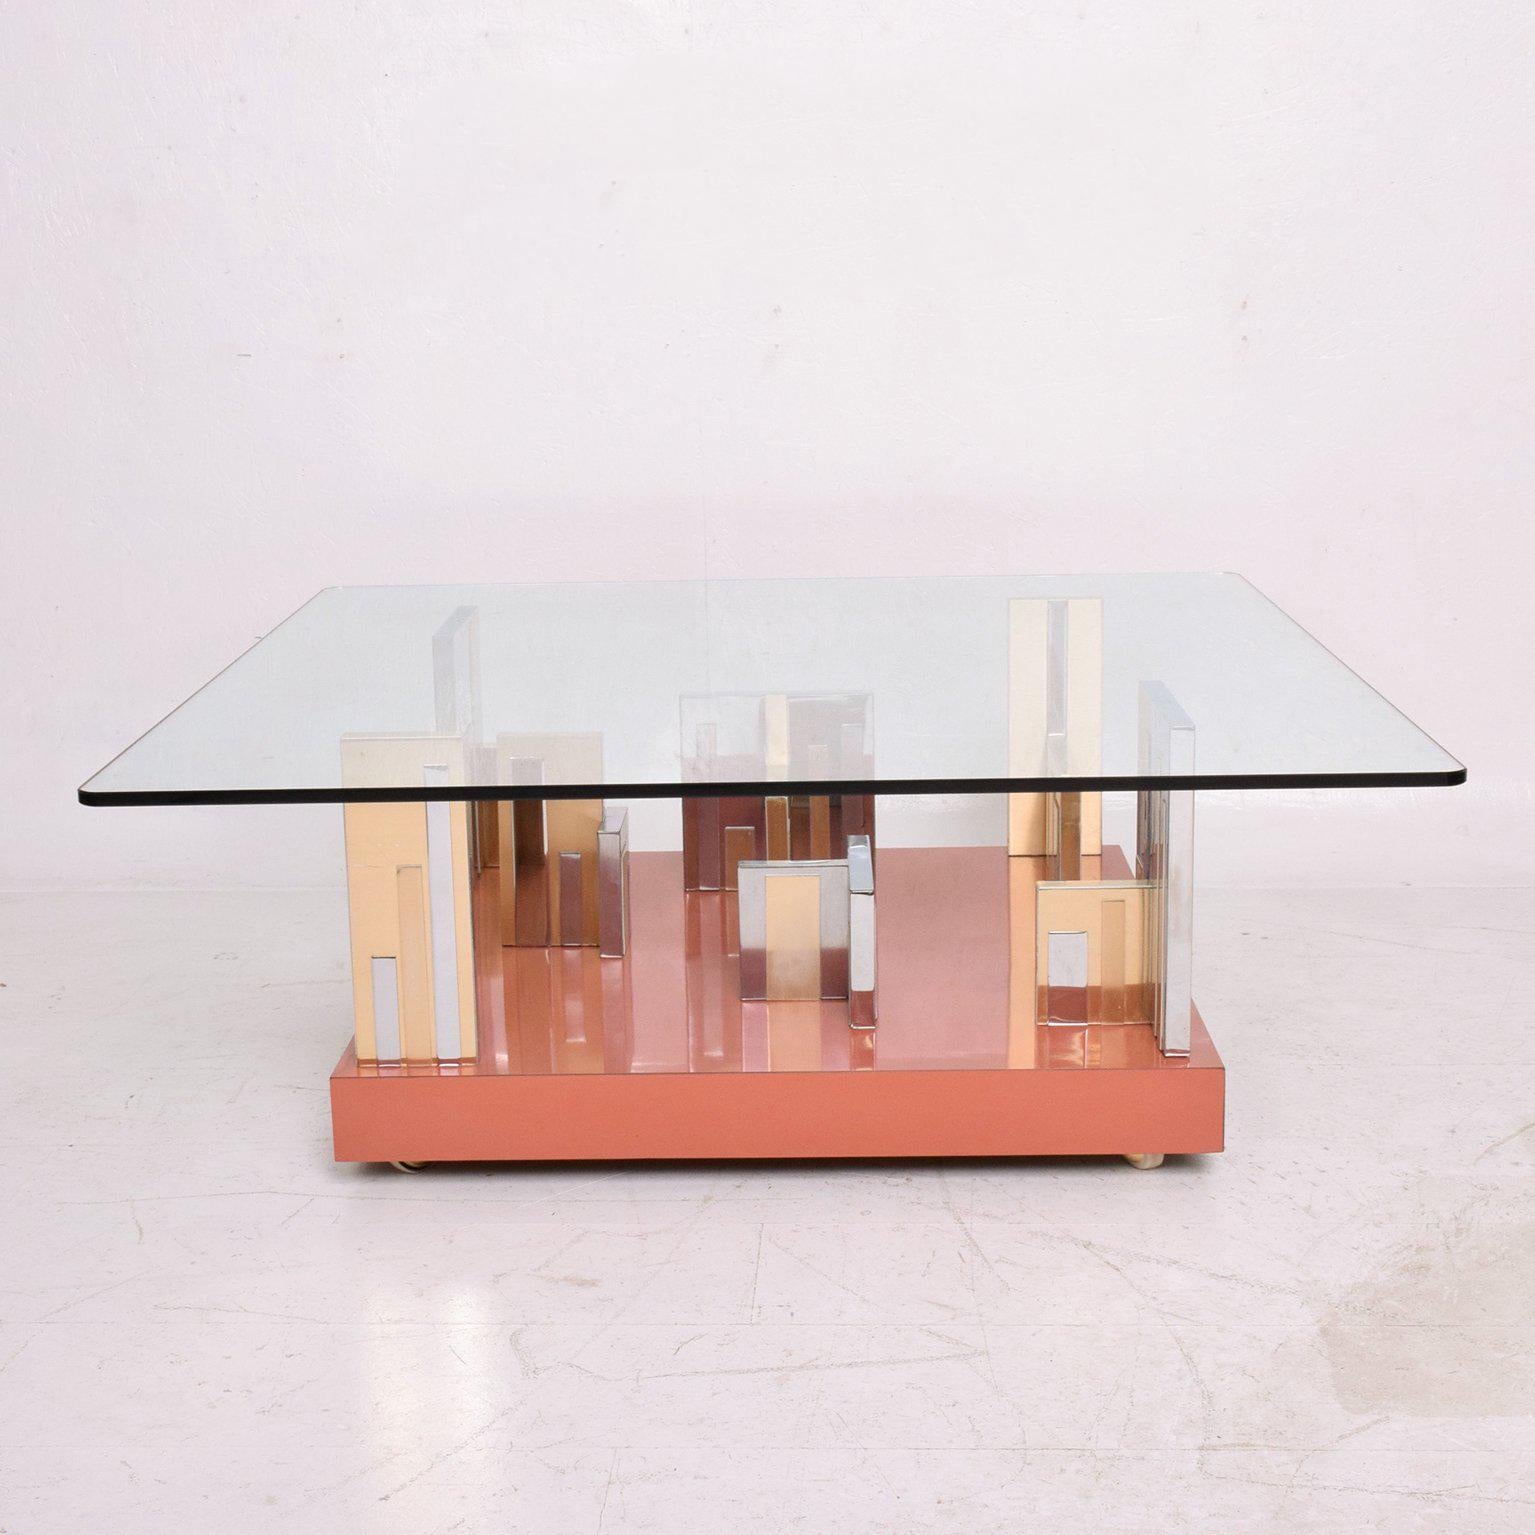 For your consideration a Mid-Century Modern city scape coffee table in original base (peach color)
Original glass top 42